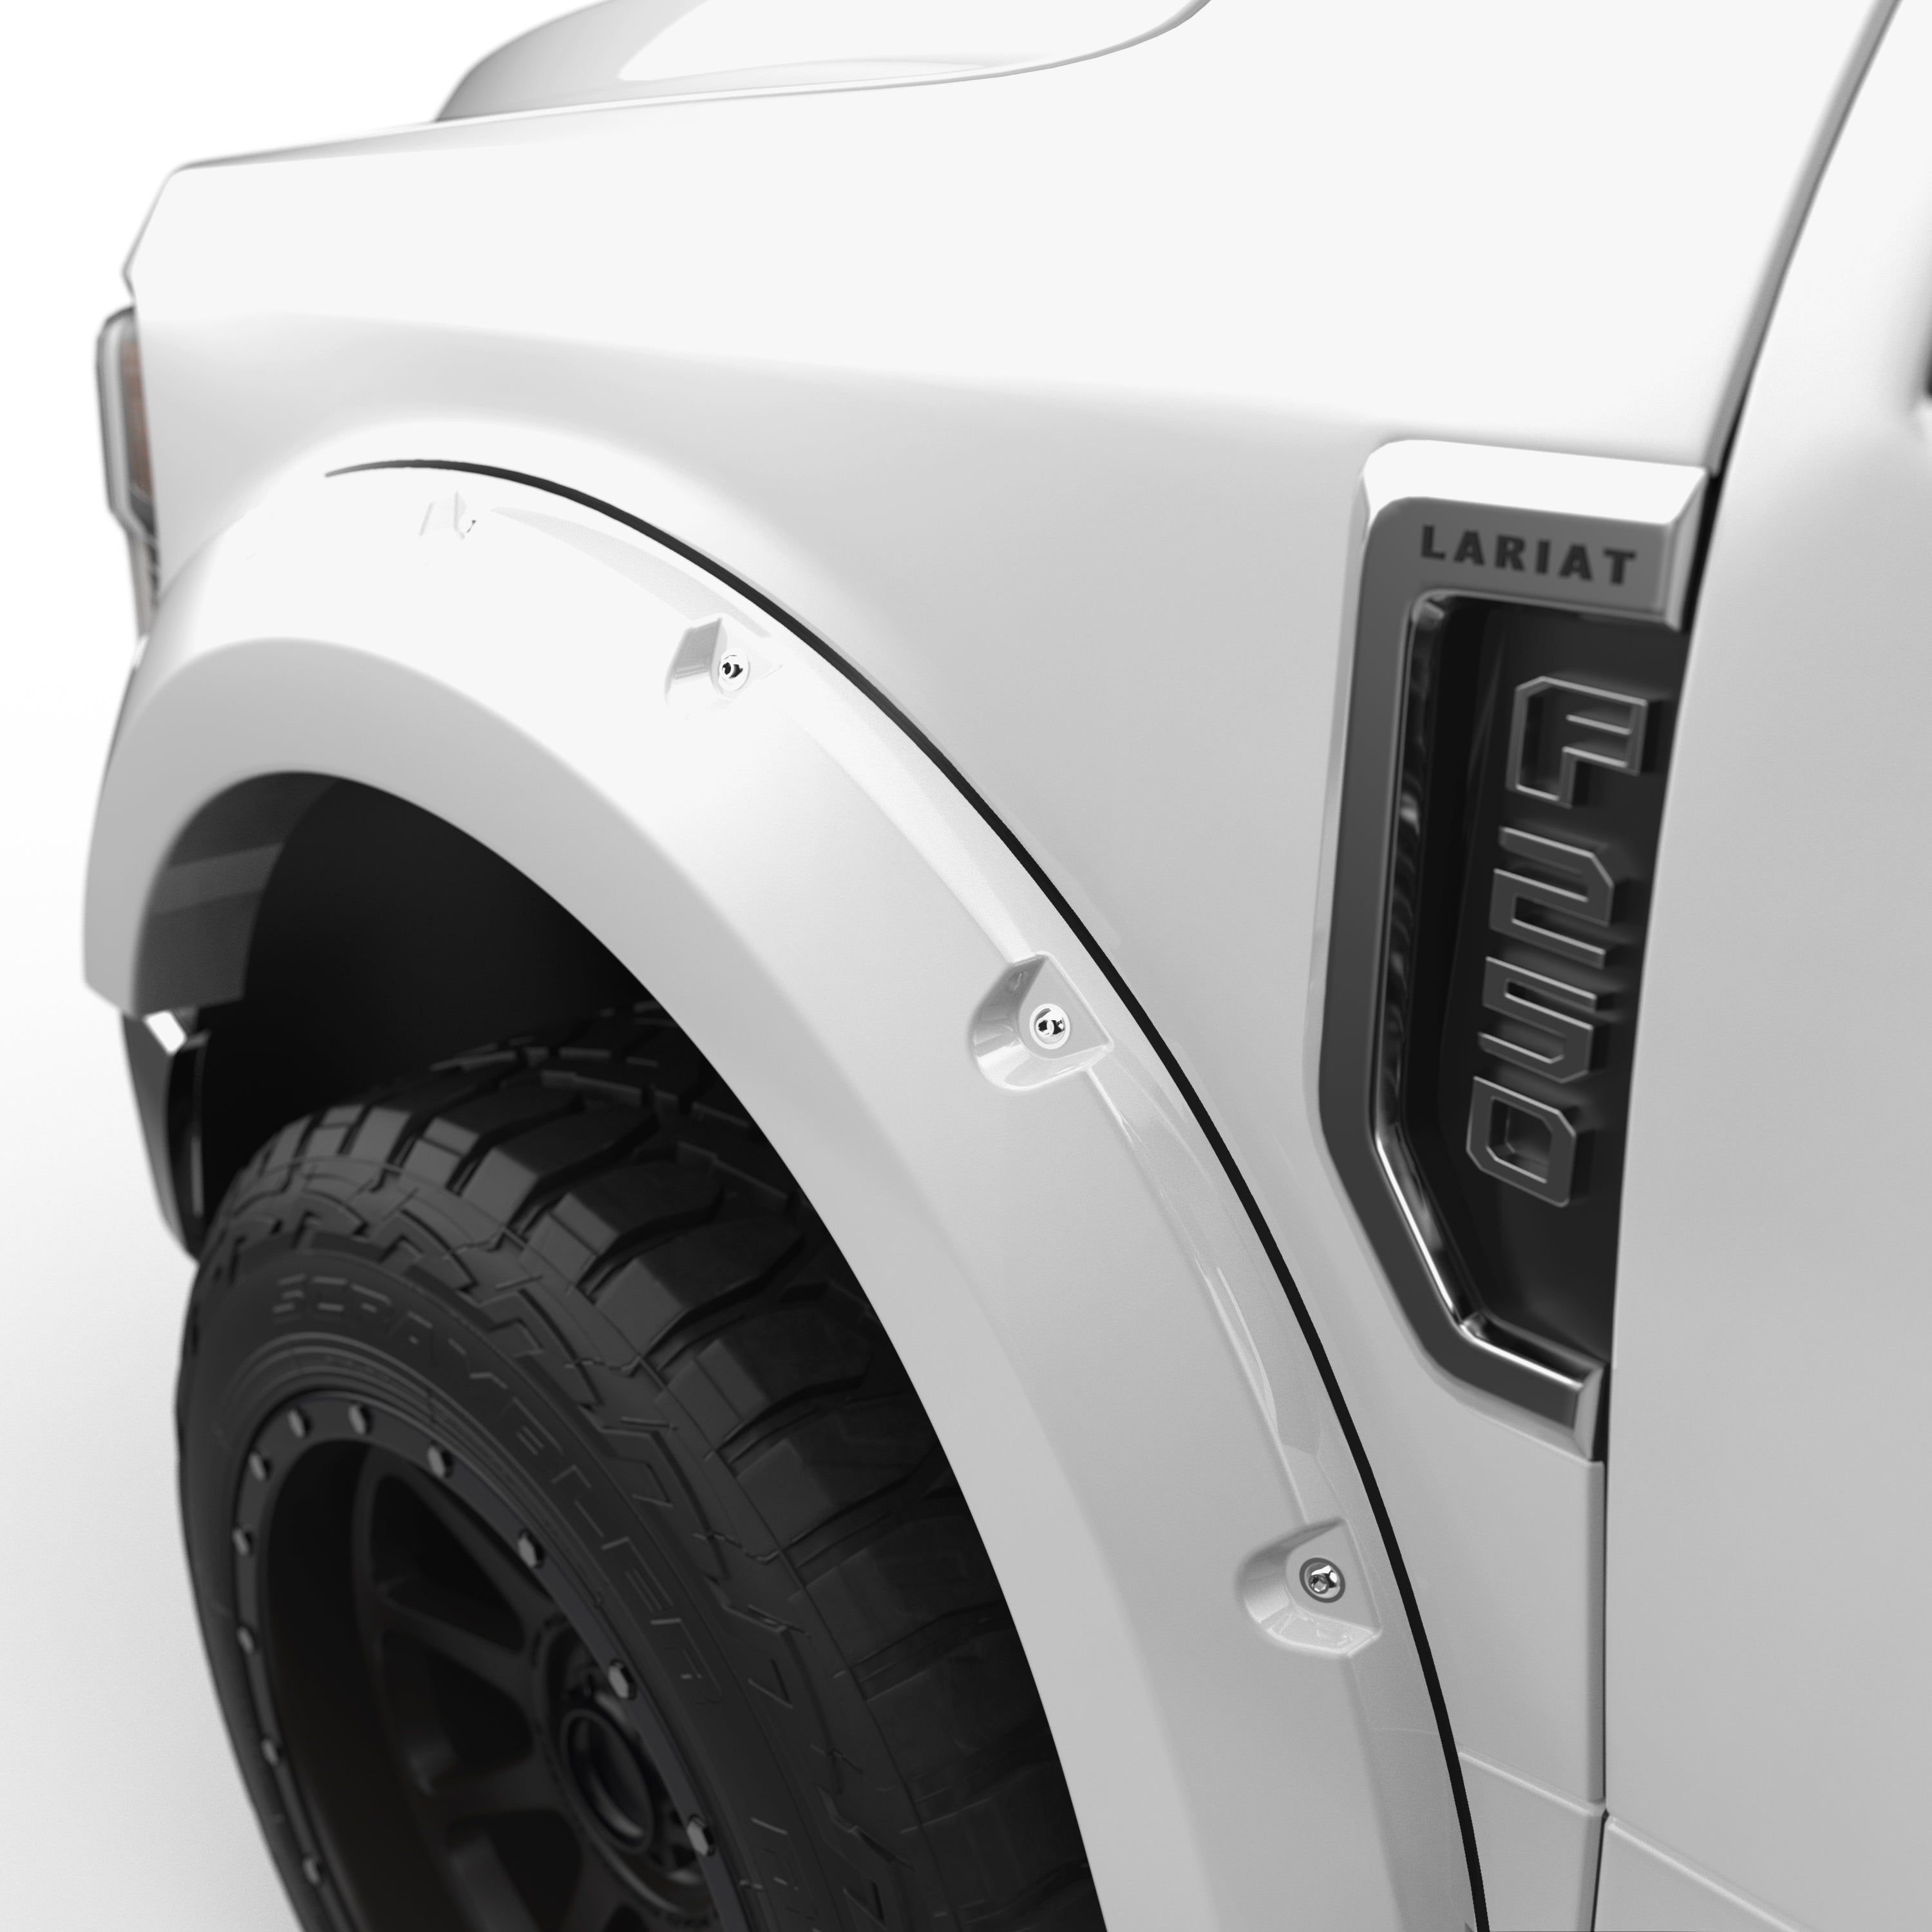 EGR 2017-2022 Ford F250 F350 Super Duty 2 & 4 Door Crew Cab Standard Cab Extended Cab Pickup Traditional Bolt-on look Fender Flares set of 4 Painted to Code Oxford White 793914-Z1